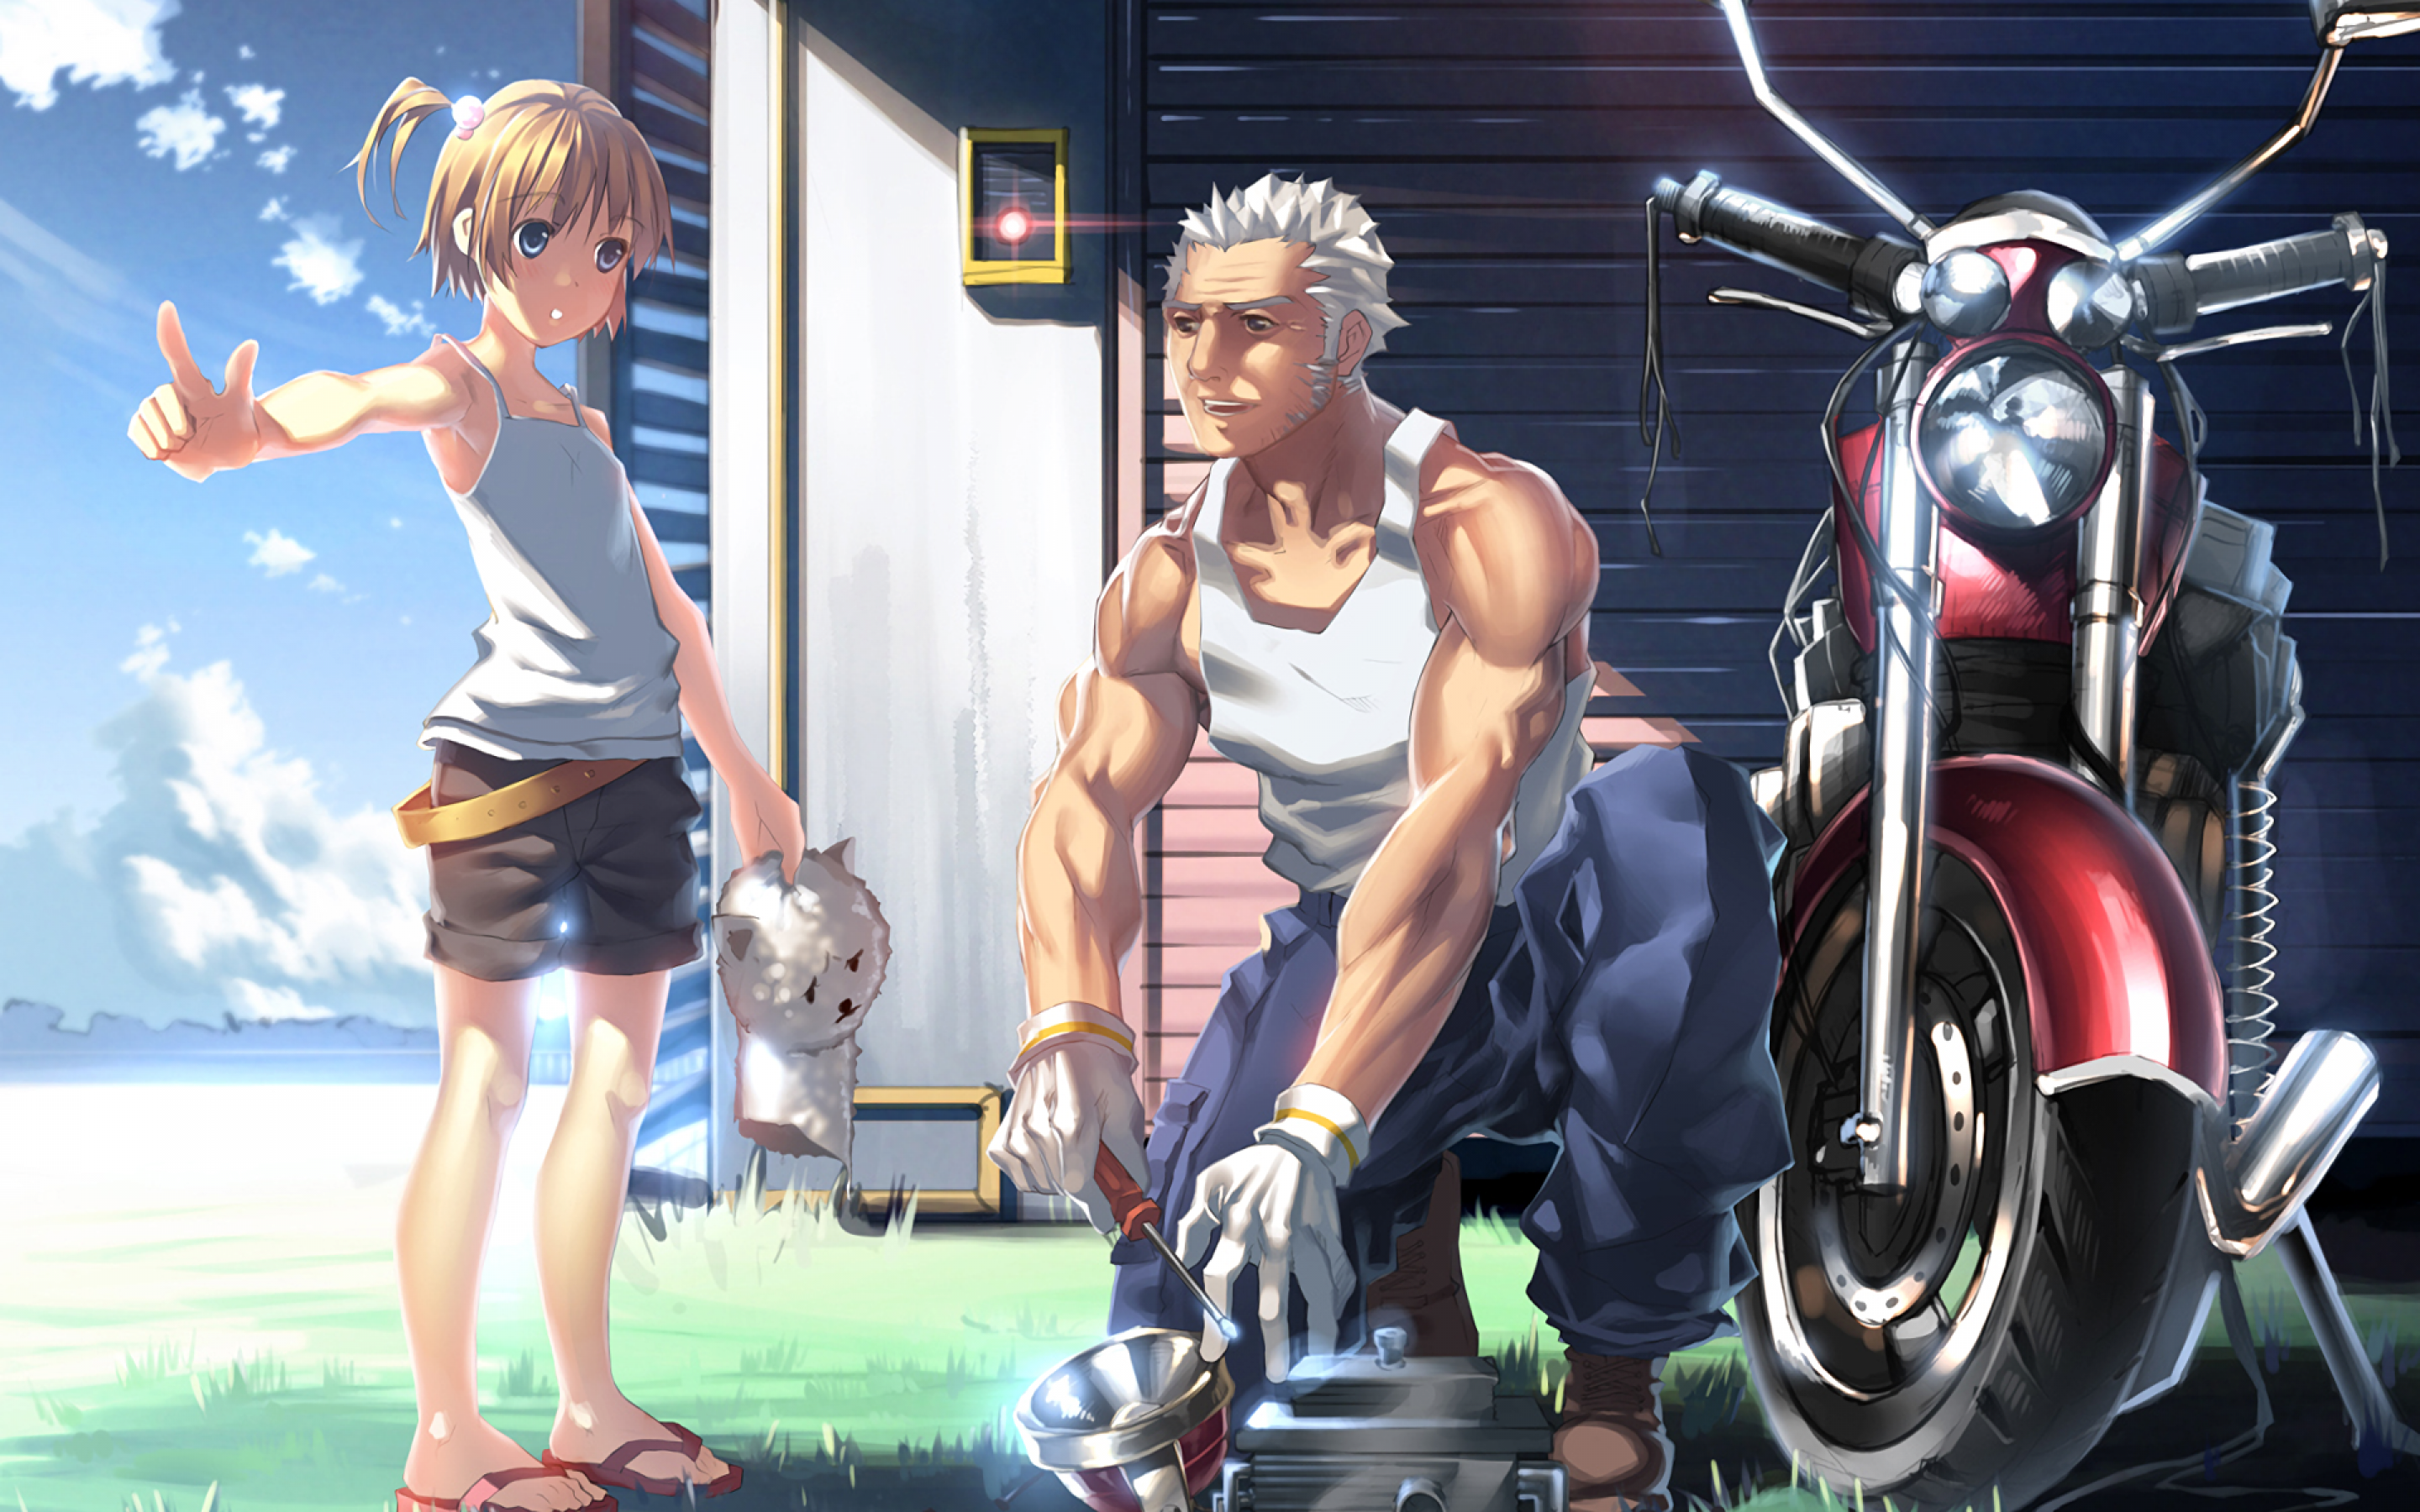 Download 2880x1800 Anime Girl, Father, Motorcycle, Sunshine